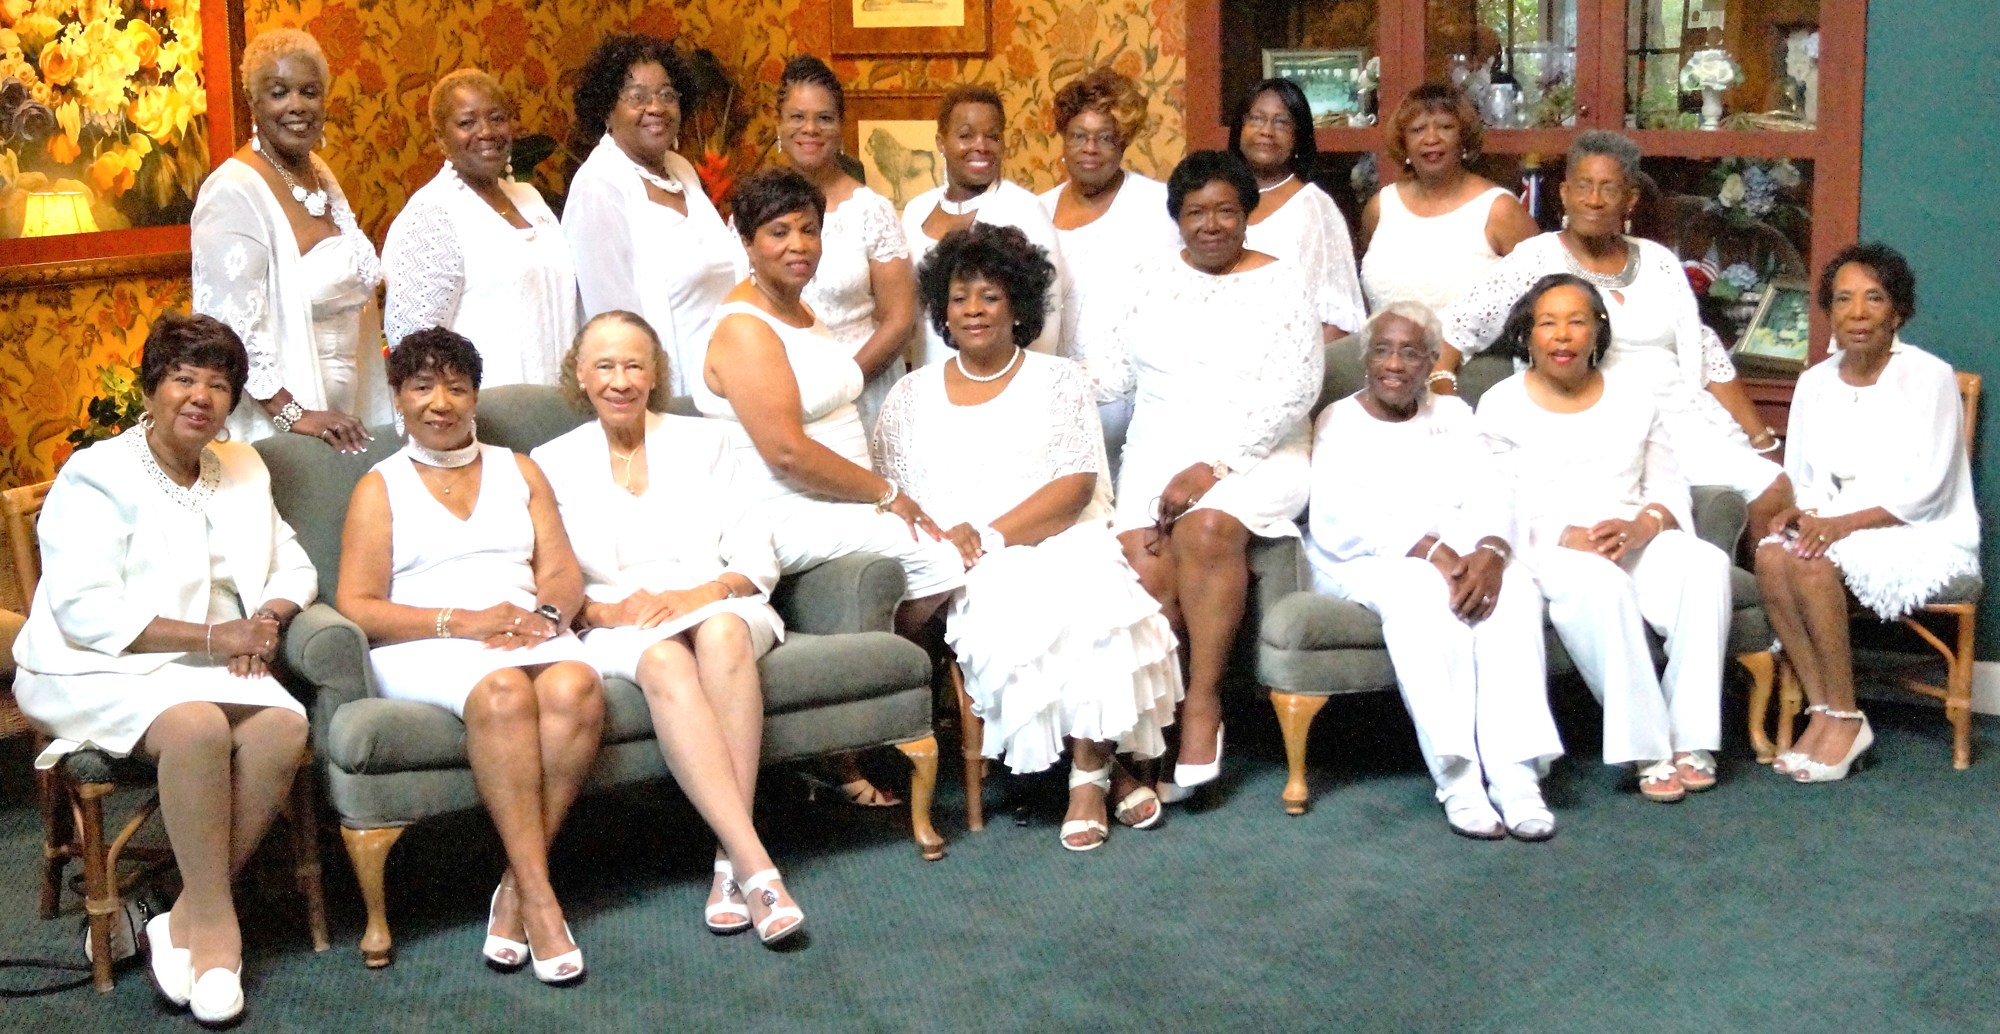 Members of the Chi Delta Omega Chapter of Alpha Kappa Alpha Sorority, Inc. celebrated its 15th anniversary with a white party. Photo courtesy of Myra Middleton-Valentine